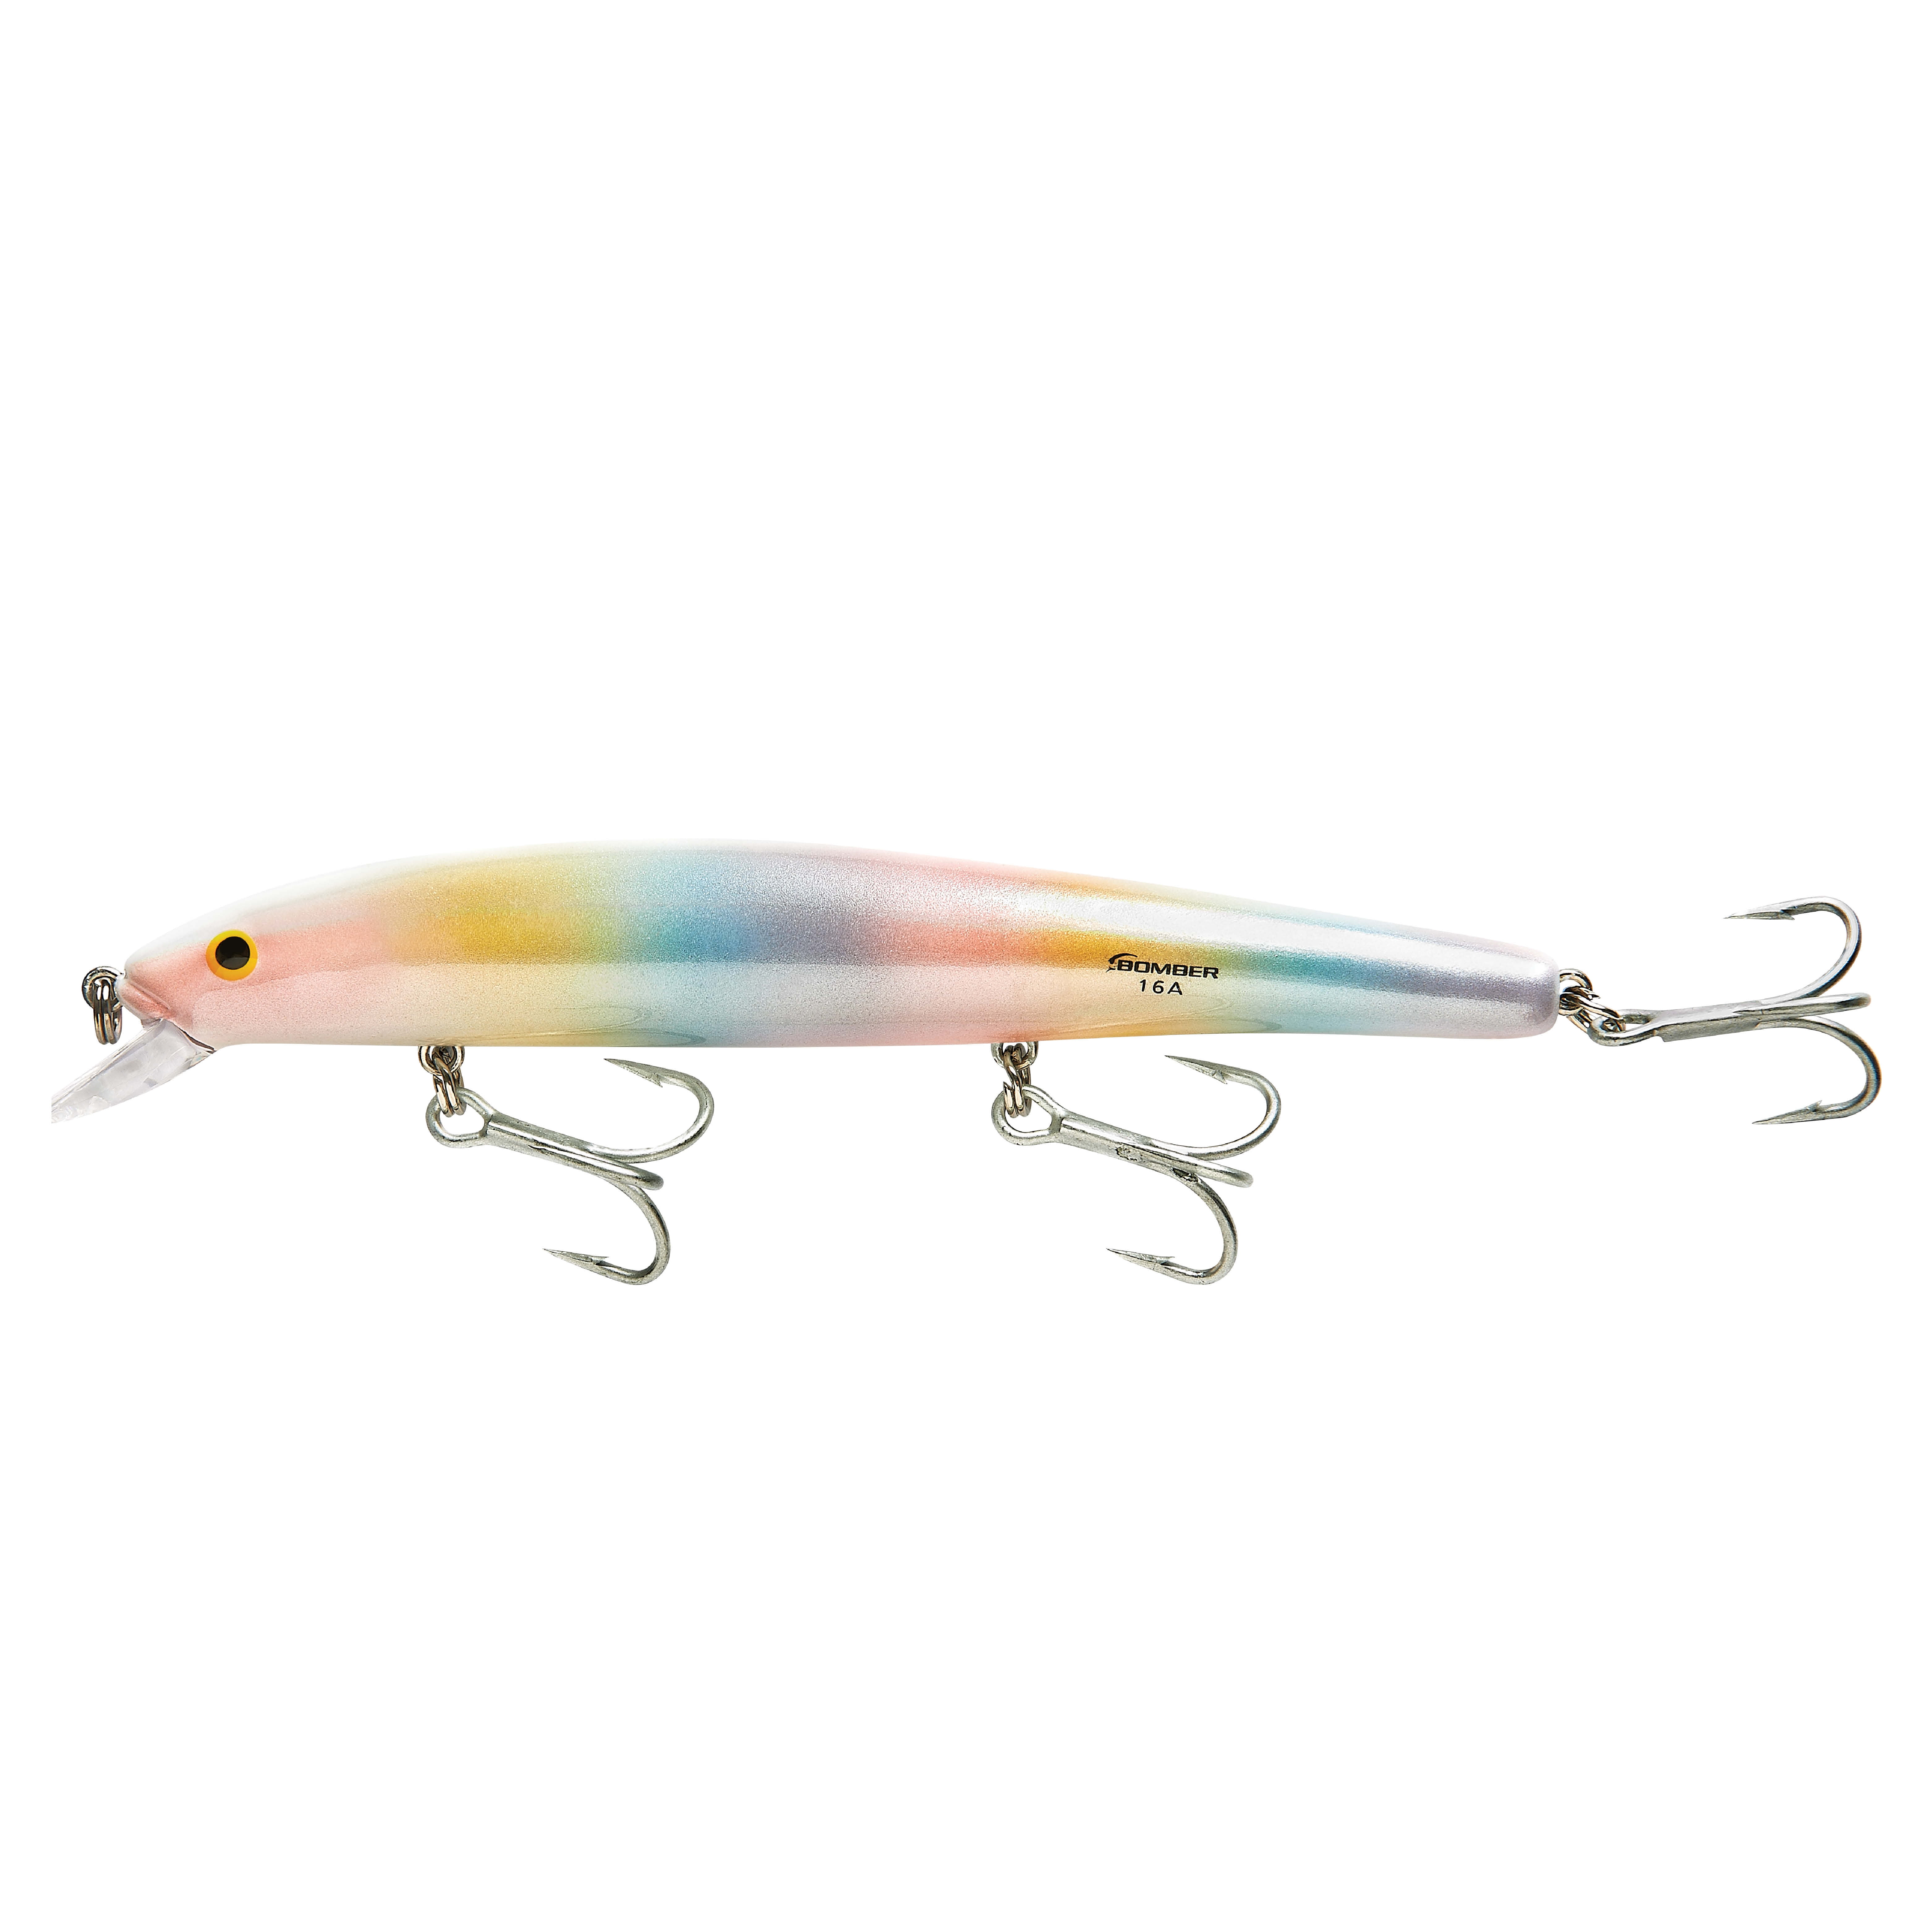 Bomber Lures Mother Of Pearl Bsw A-salt Fishing Lure - Salt Water